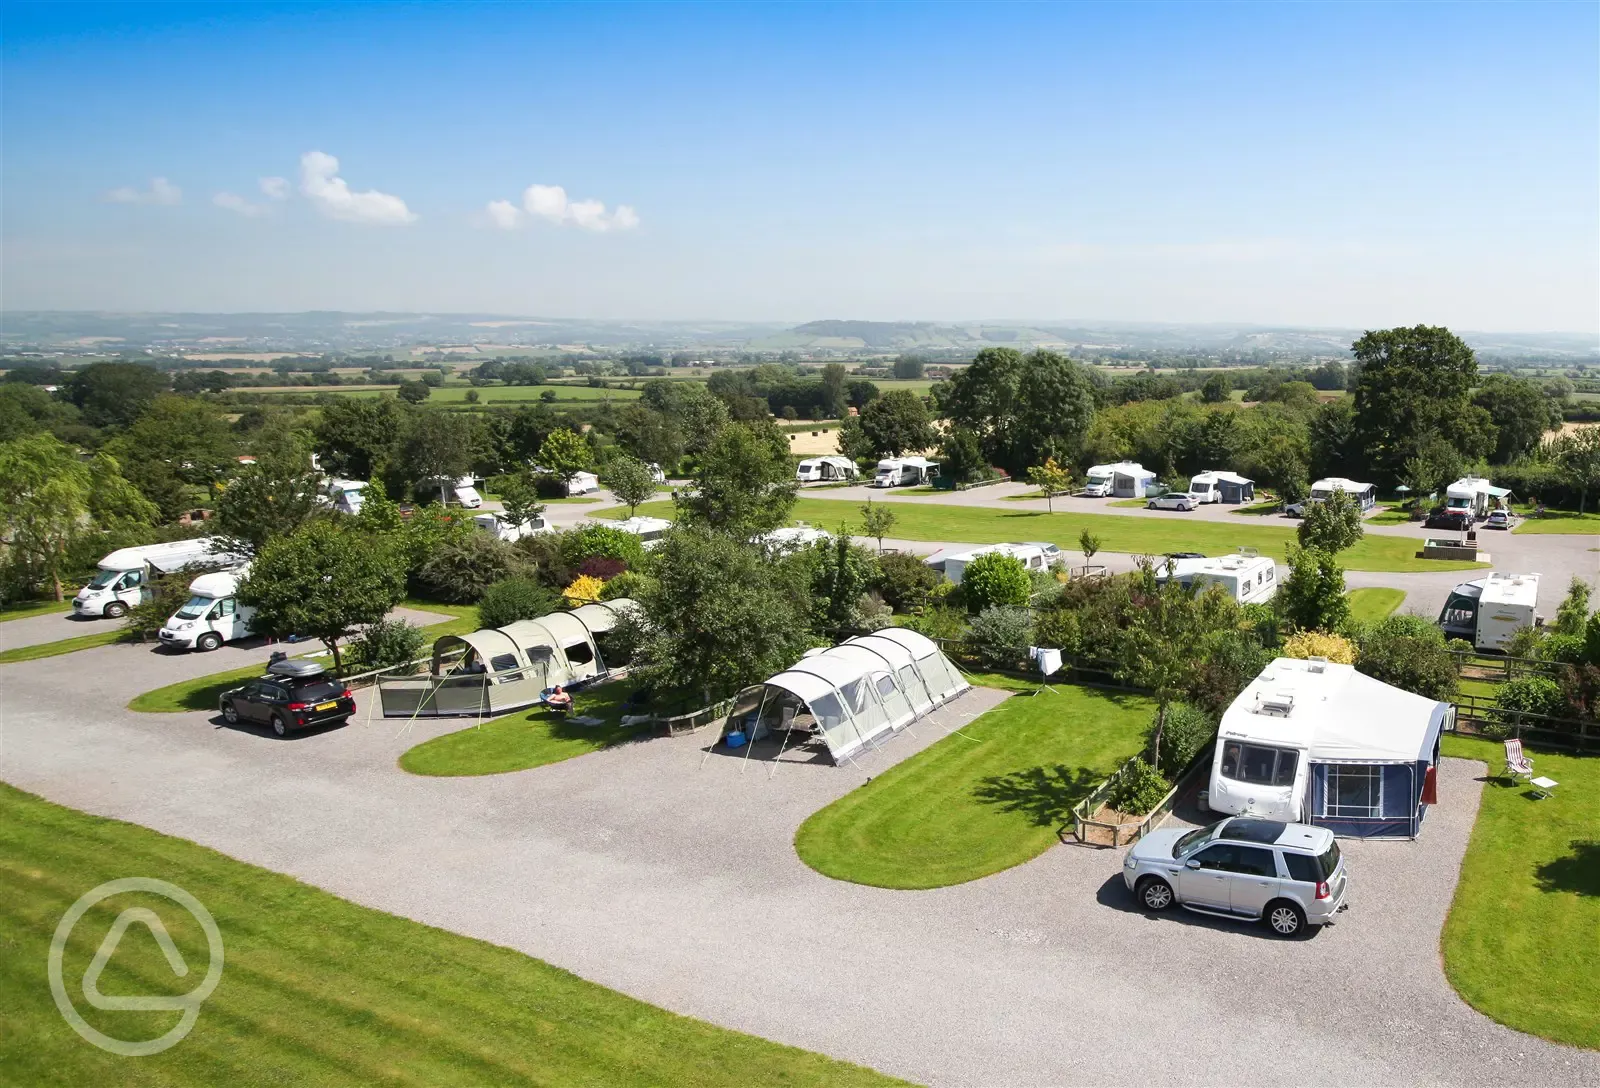 View across Top &amp; Lower Oaks - all weather pitches for tents, motorhomes, campers and caravans